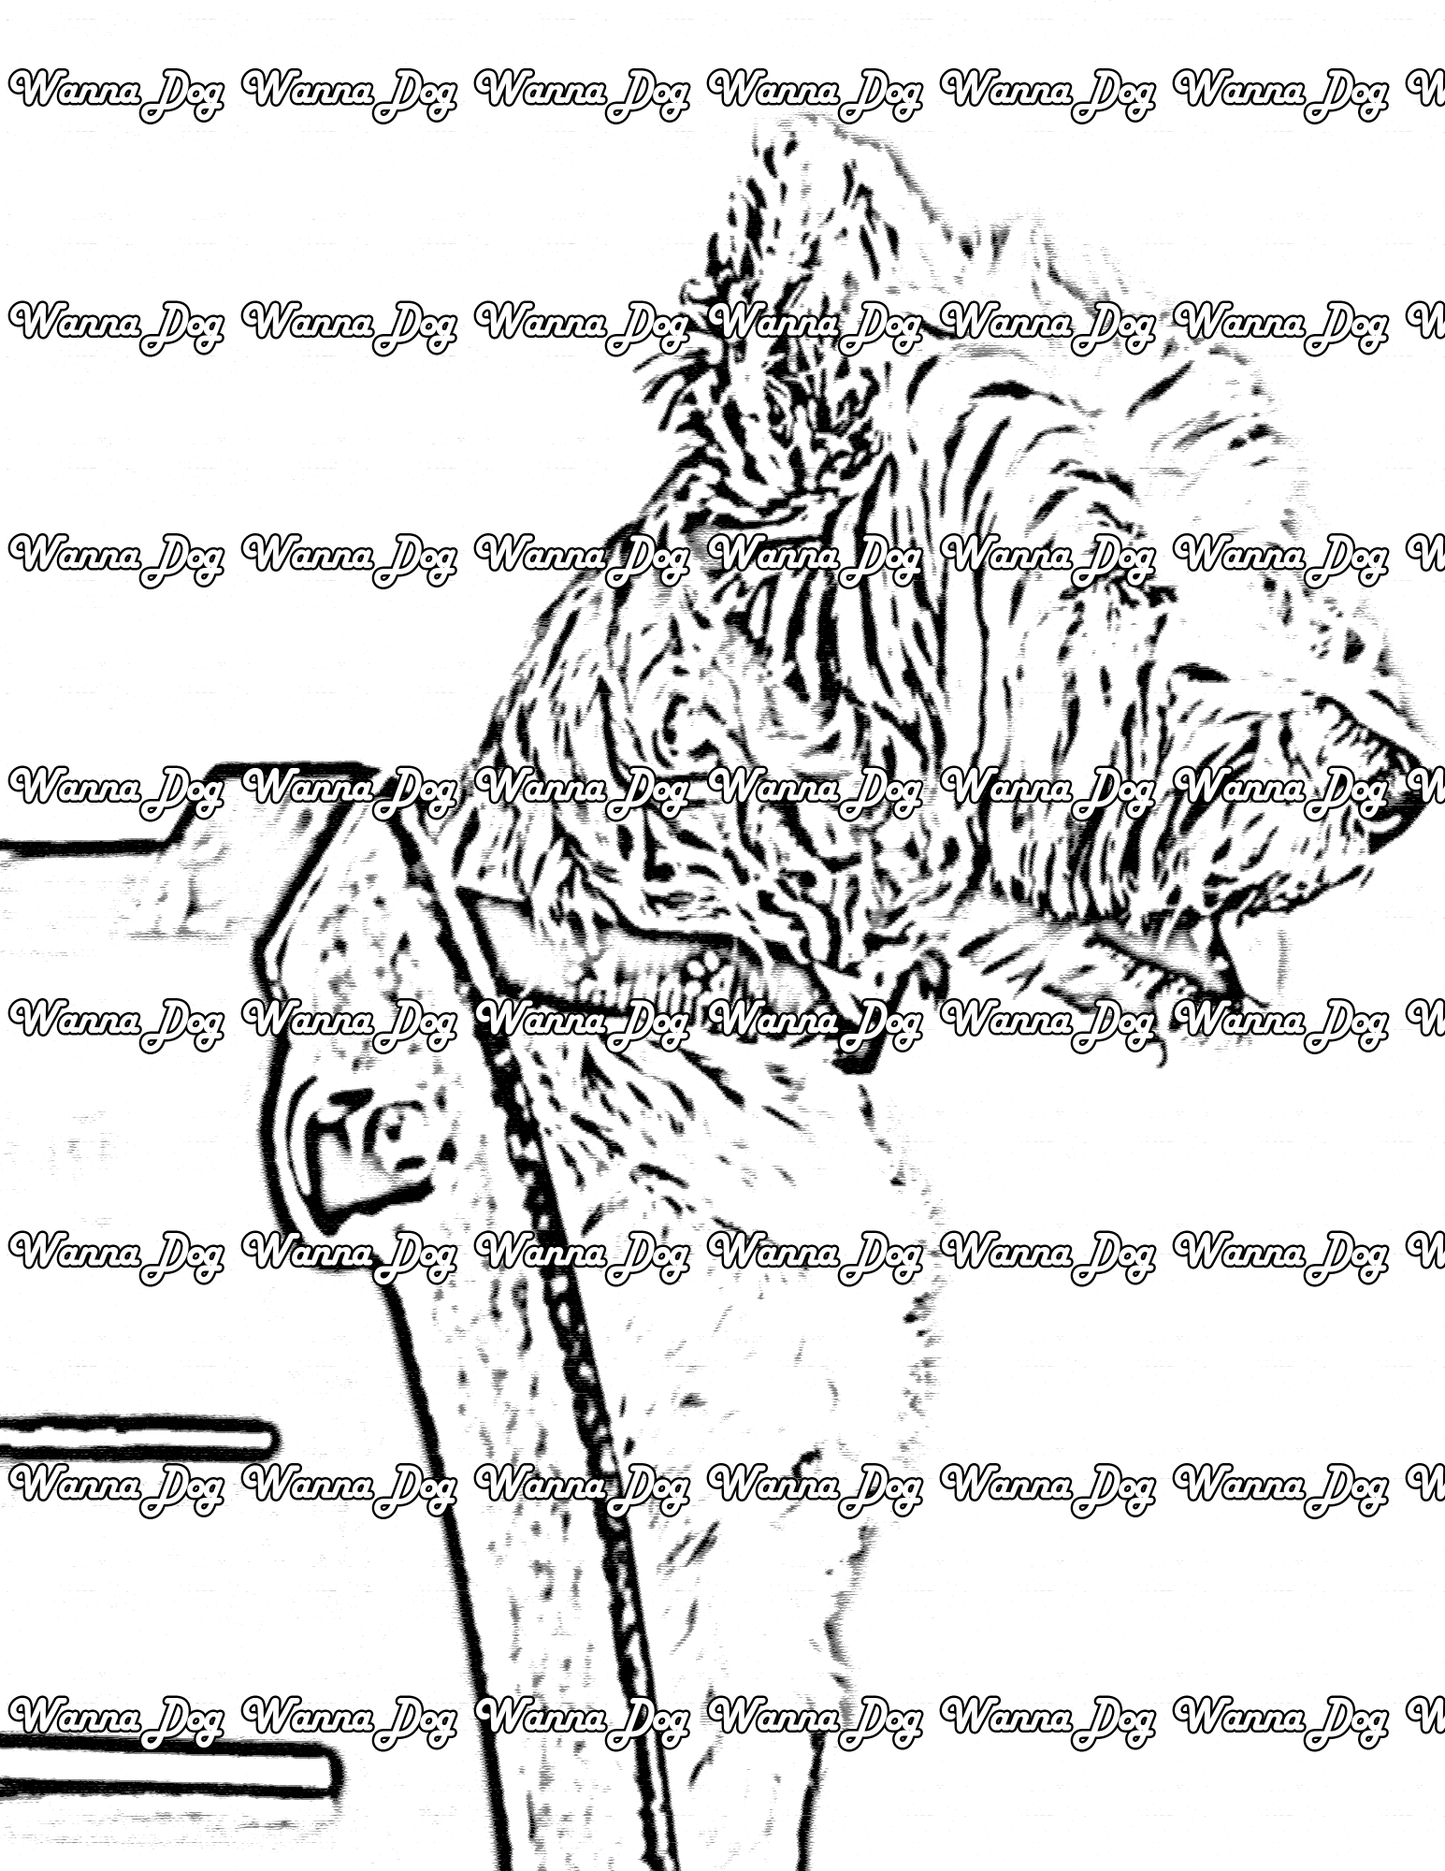 Cairn Terrier Coloring Page of a Cairn Terrier sitting on a chair outside